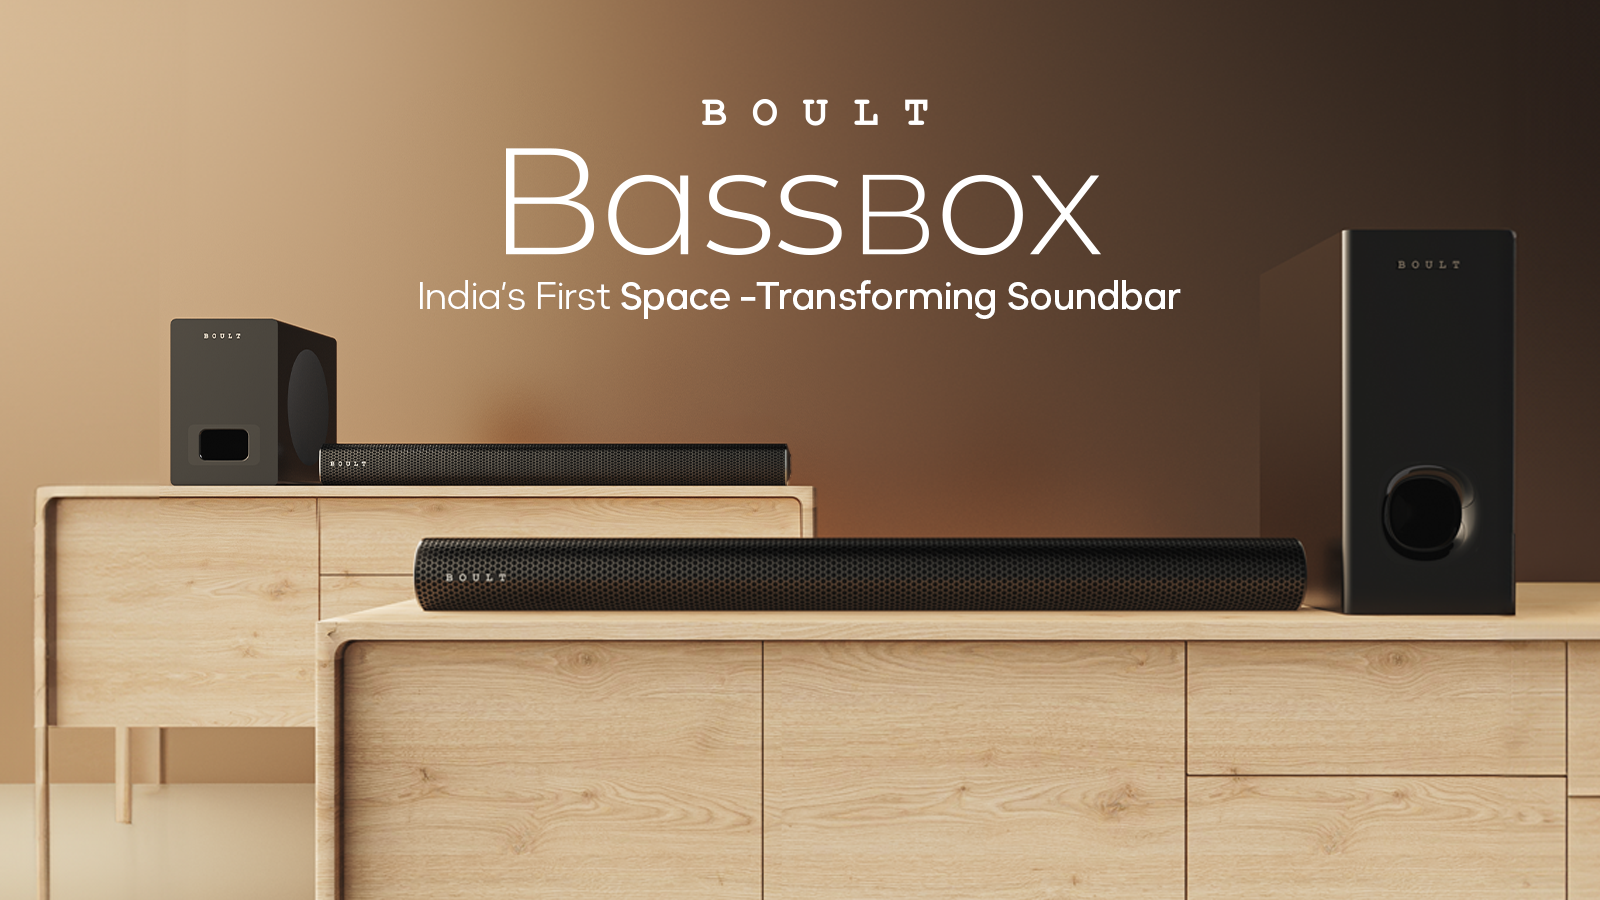 BOULT Enters into the smart home audio industry with SoundBar